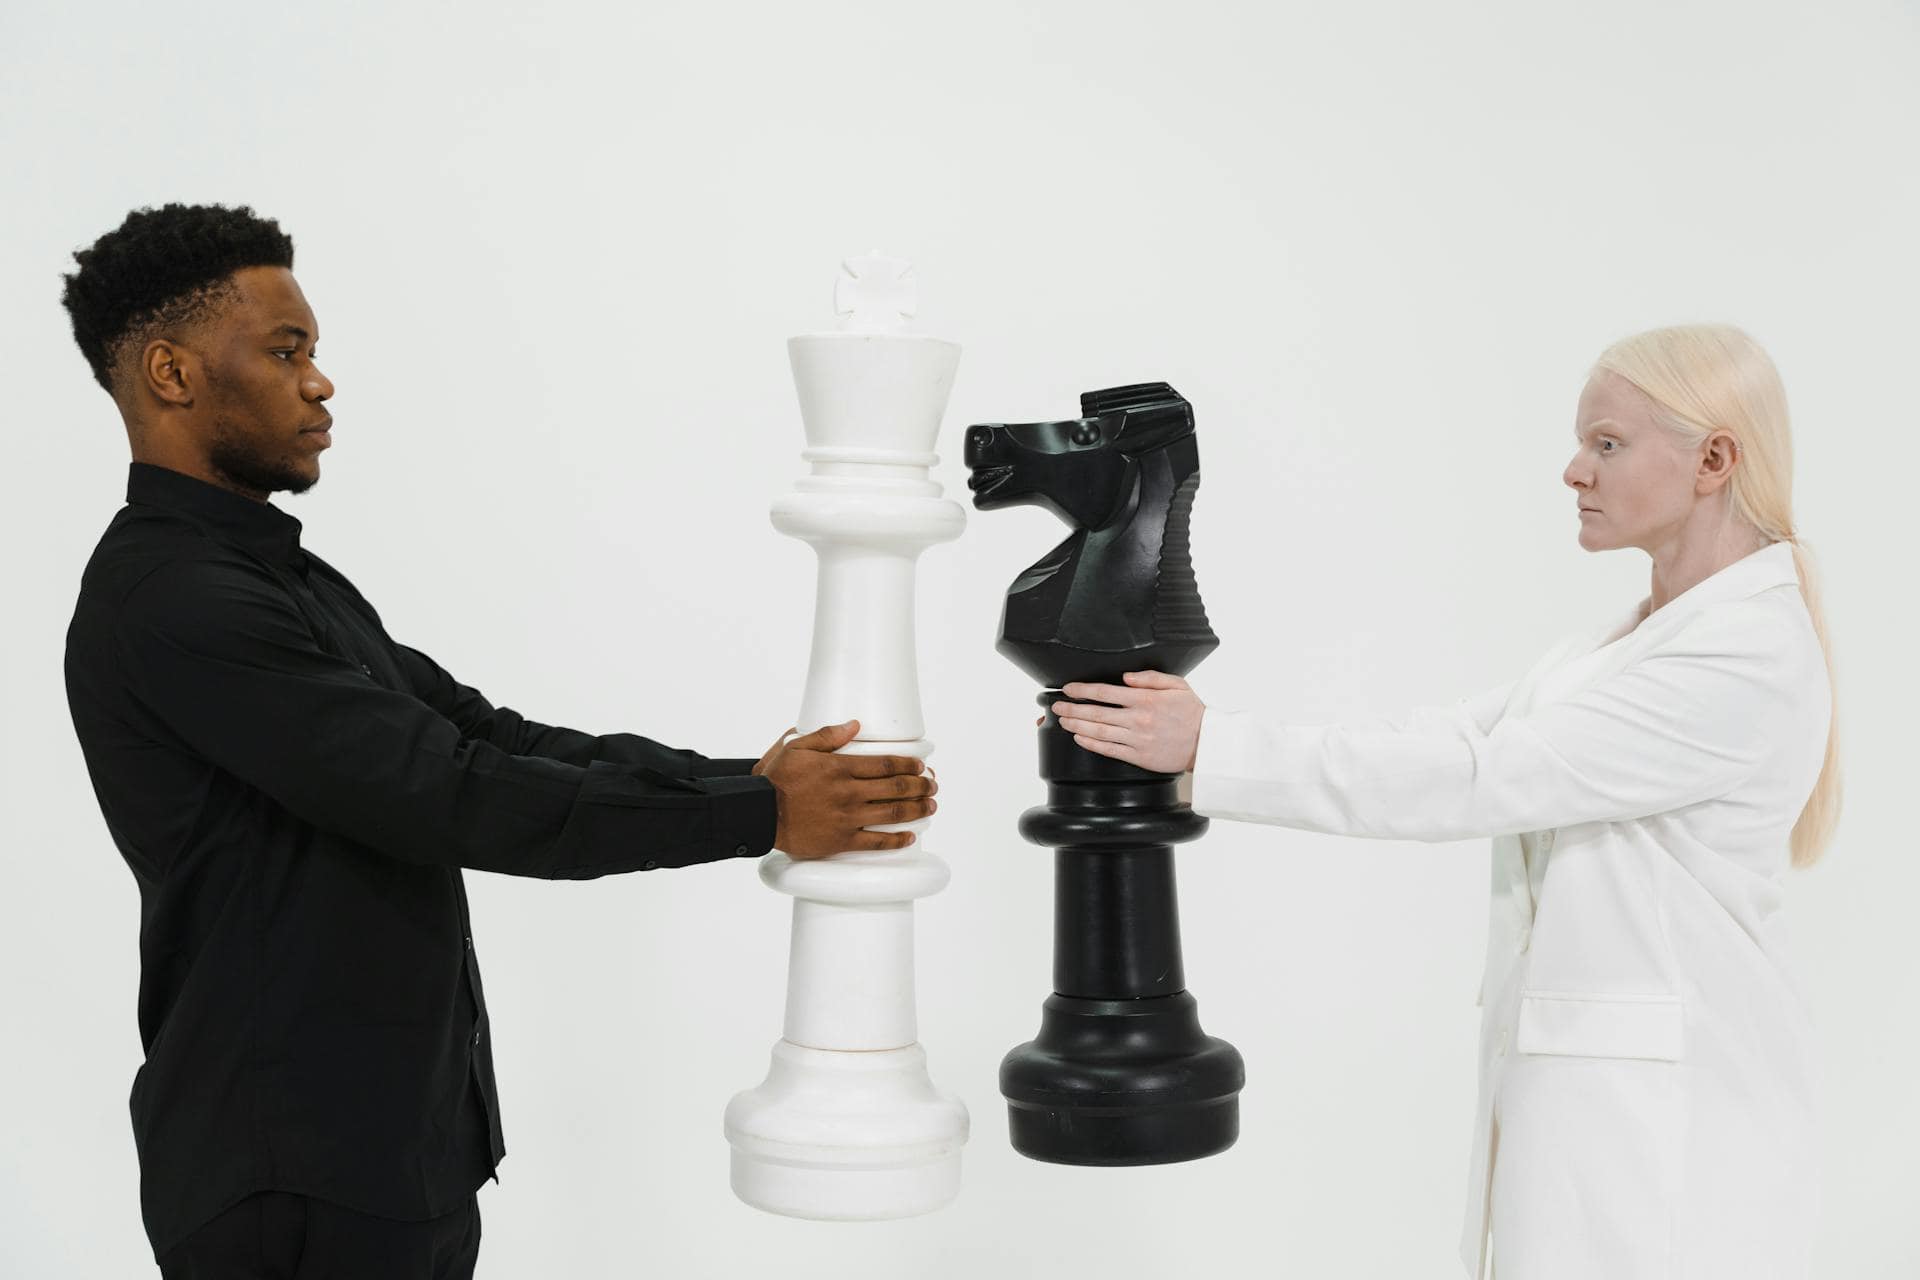 <p>Though originally neutral terms, their association with racial dynamics and discrimination has led to criticism, prompting calls for alternative terminology to avoid reinforcing racial biases. Awareness of their racial connotations has led to their replacement with more inclusive language.</p>